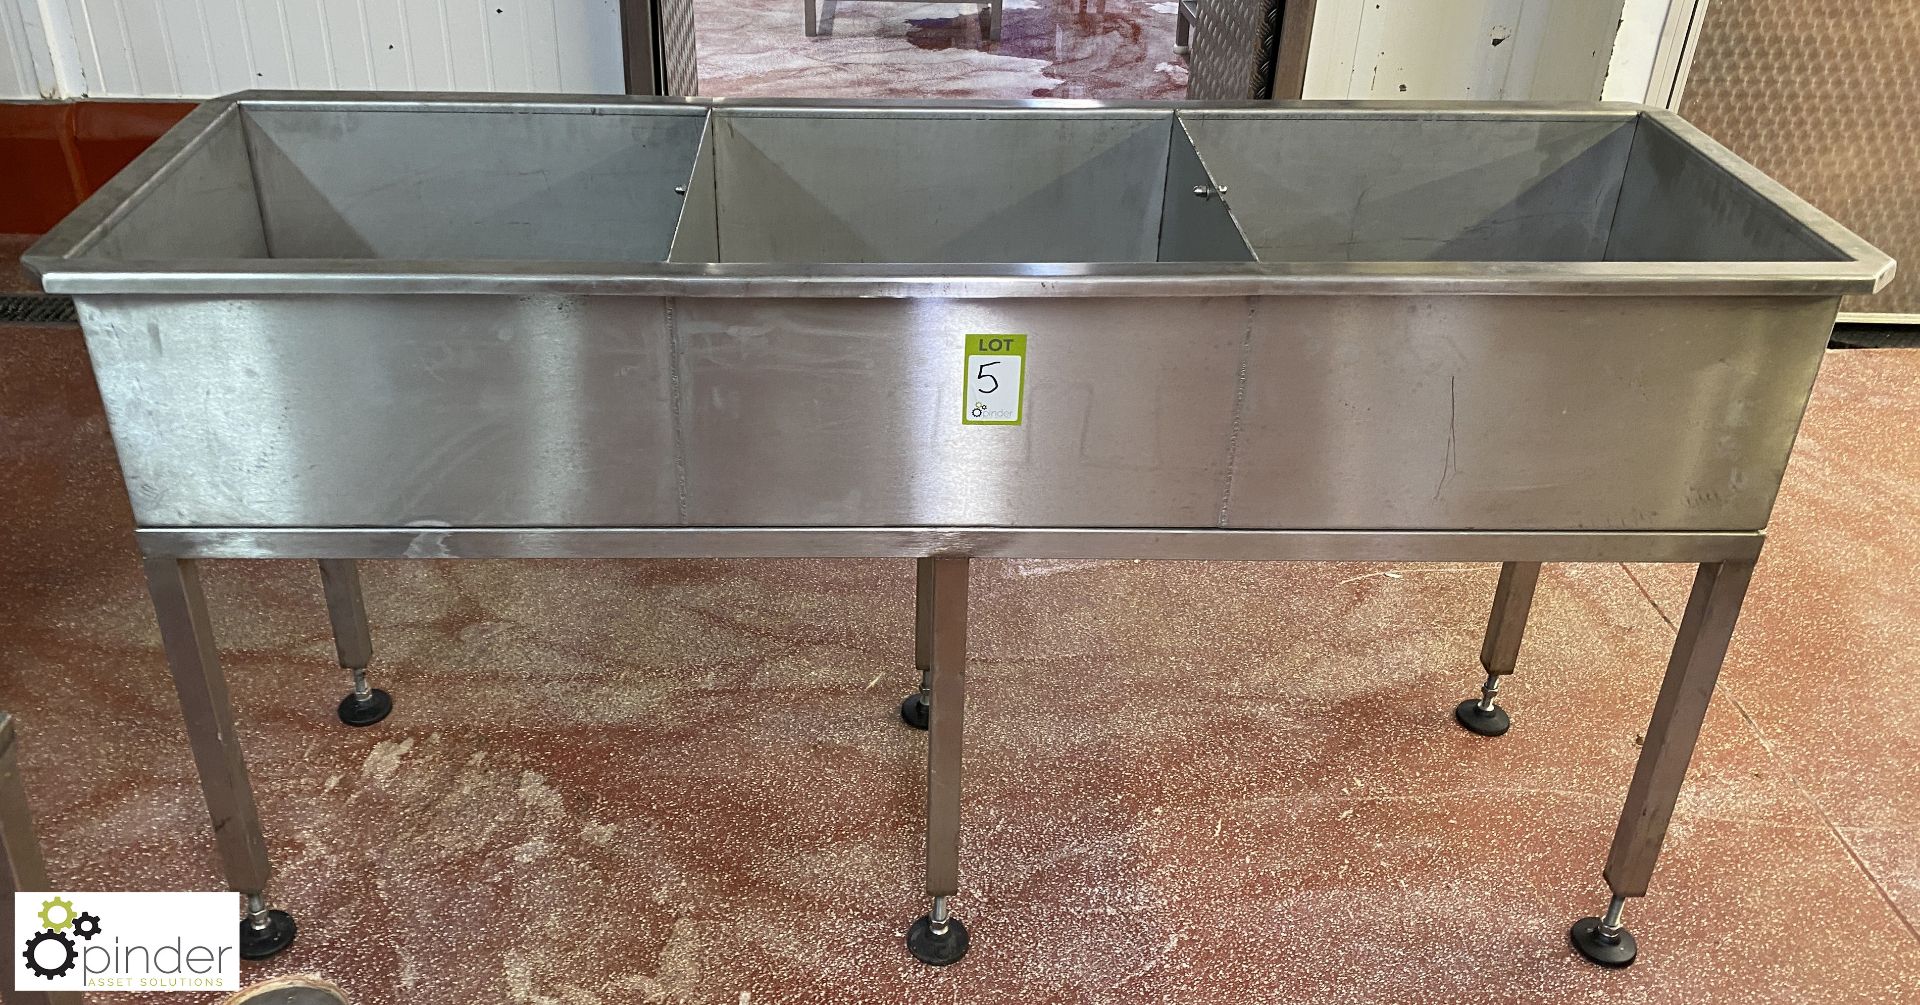 Stainless steel 3-compartment Wash/Rinse Tank, 1188mm x 580mm x 980mm (Lift Out Fee: £10 plus VAT) - Image 2 of 6